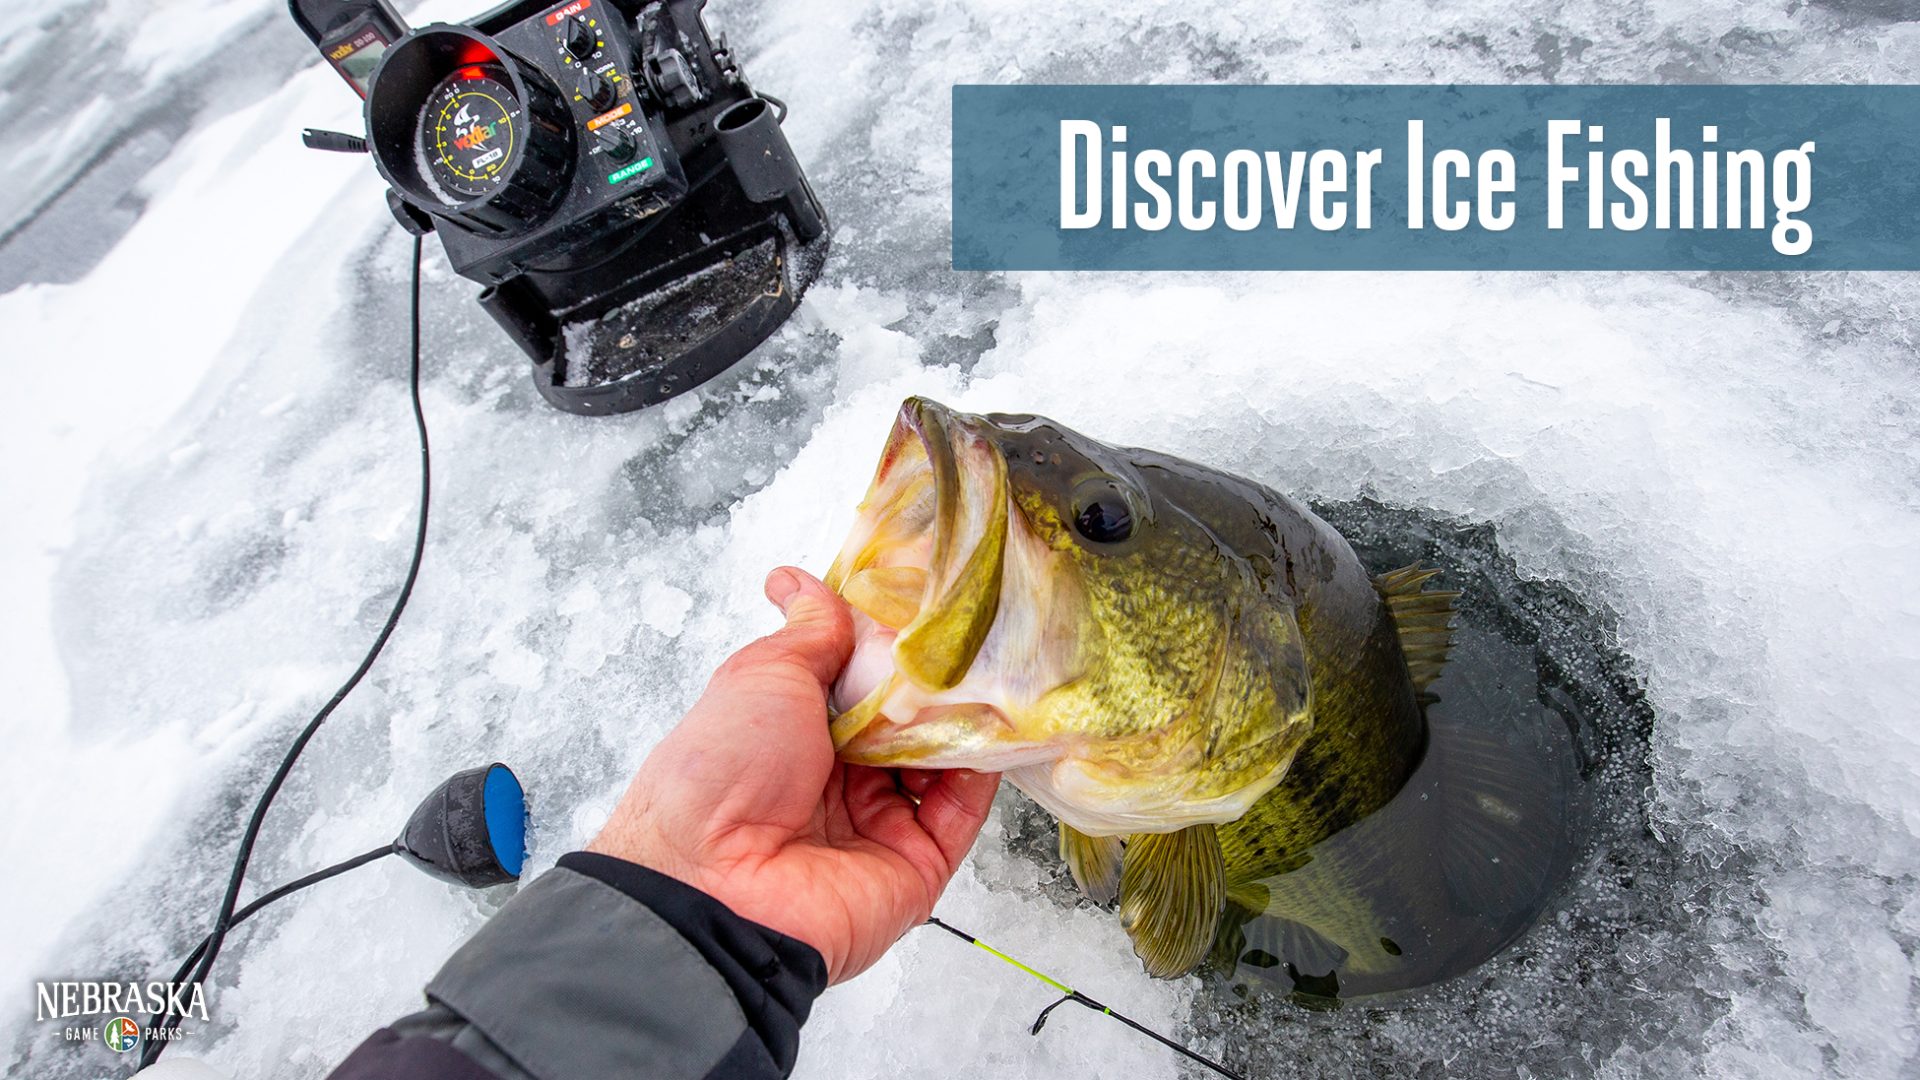 Discover Ice Fishing: Norfolk *On-Ice and Classroom Event Cancelled*